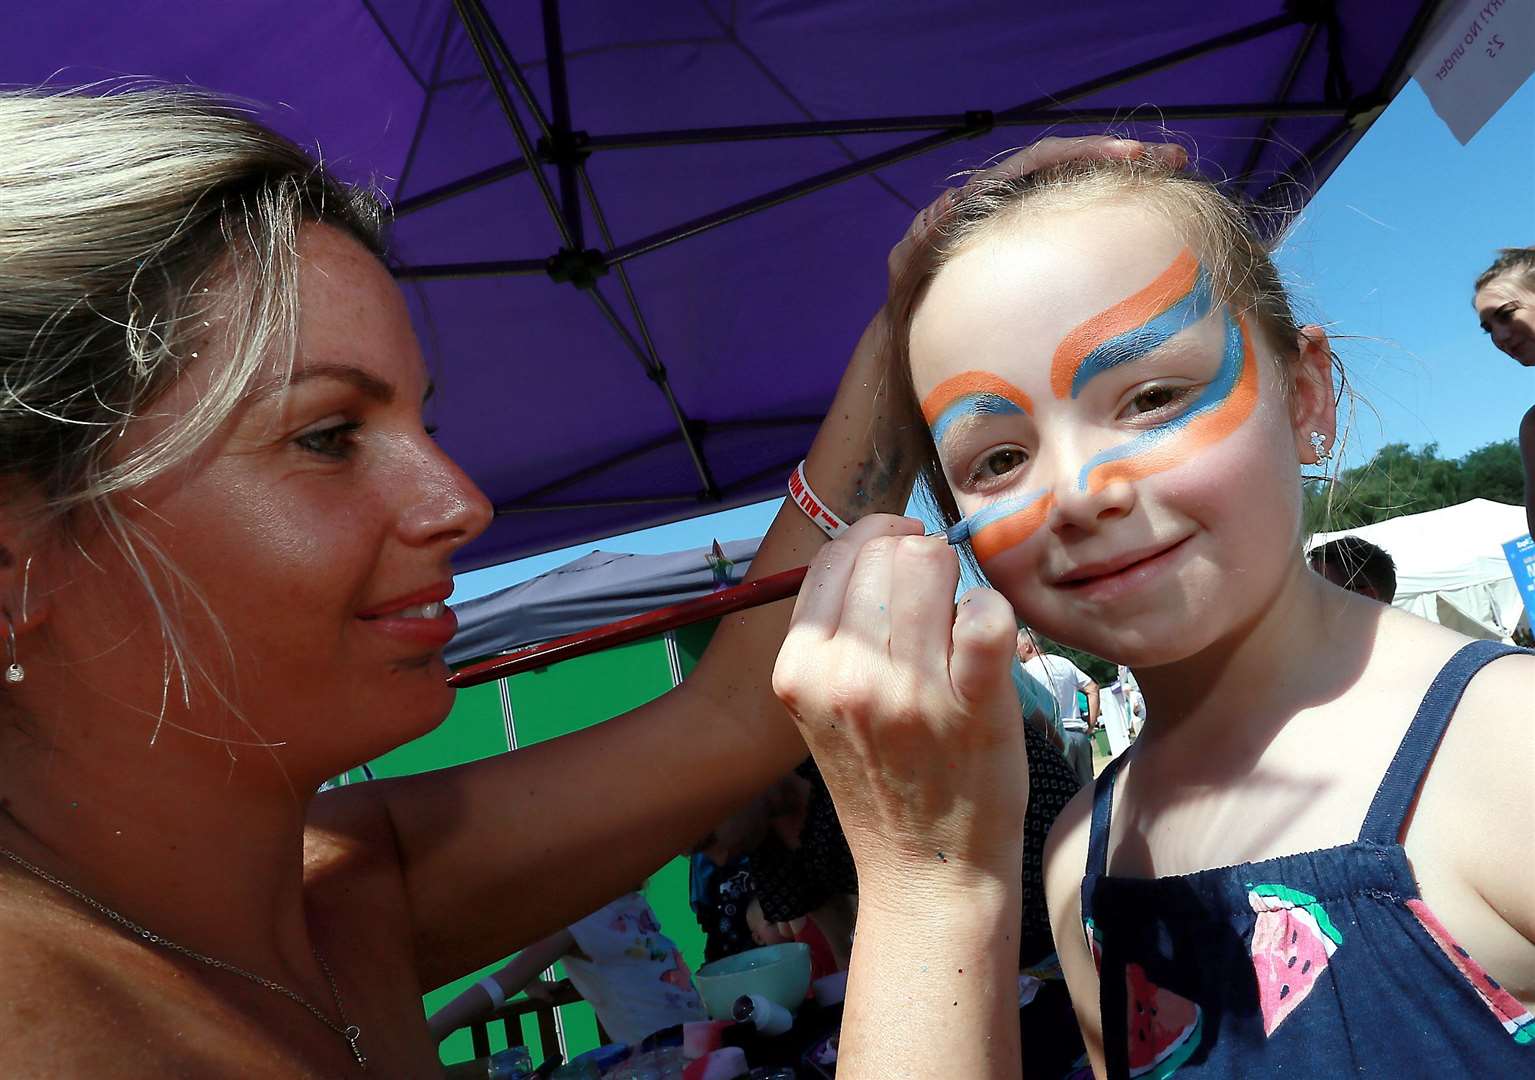 Face painting at last year's festival